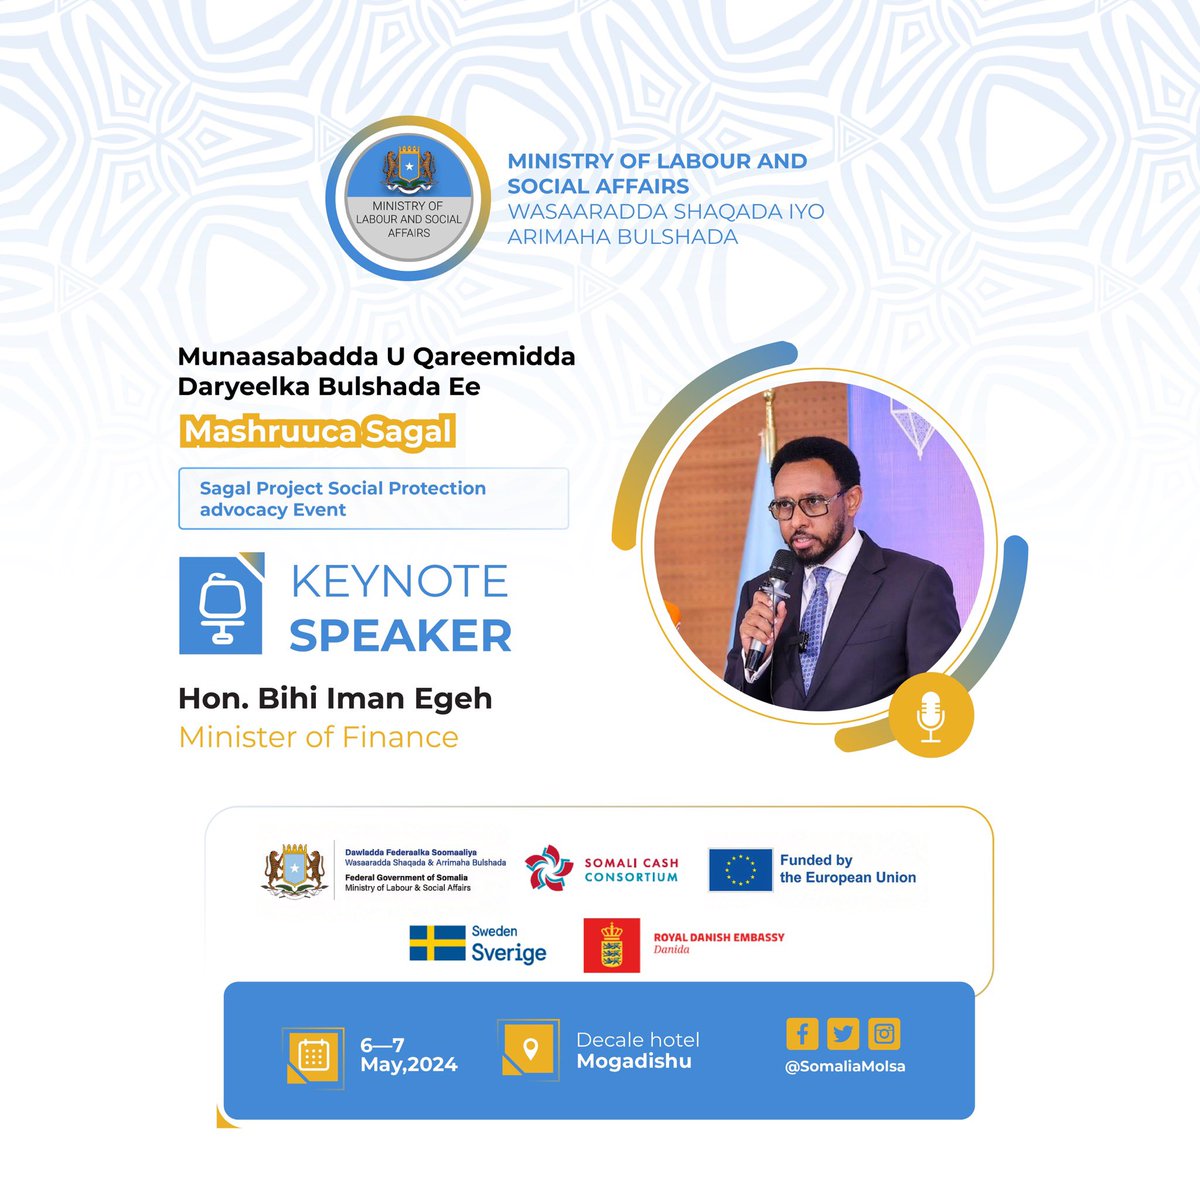 .@SomaliaMolsa is thrilled to announce that the Minister of @MoF_Somalia for the FGS, H.E. @BihiEgeh, will be one of the distinguished keynote speakers at the Social Protection Advocacy Event, which is scheduled to take place in Mogadishu on May 6th–7th, 2024.
#SocialProtection